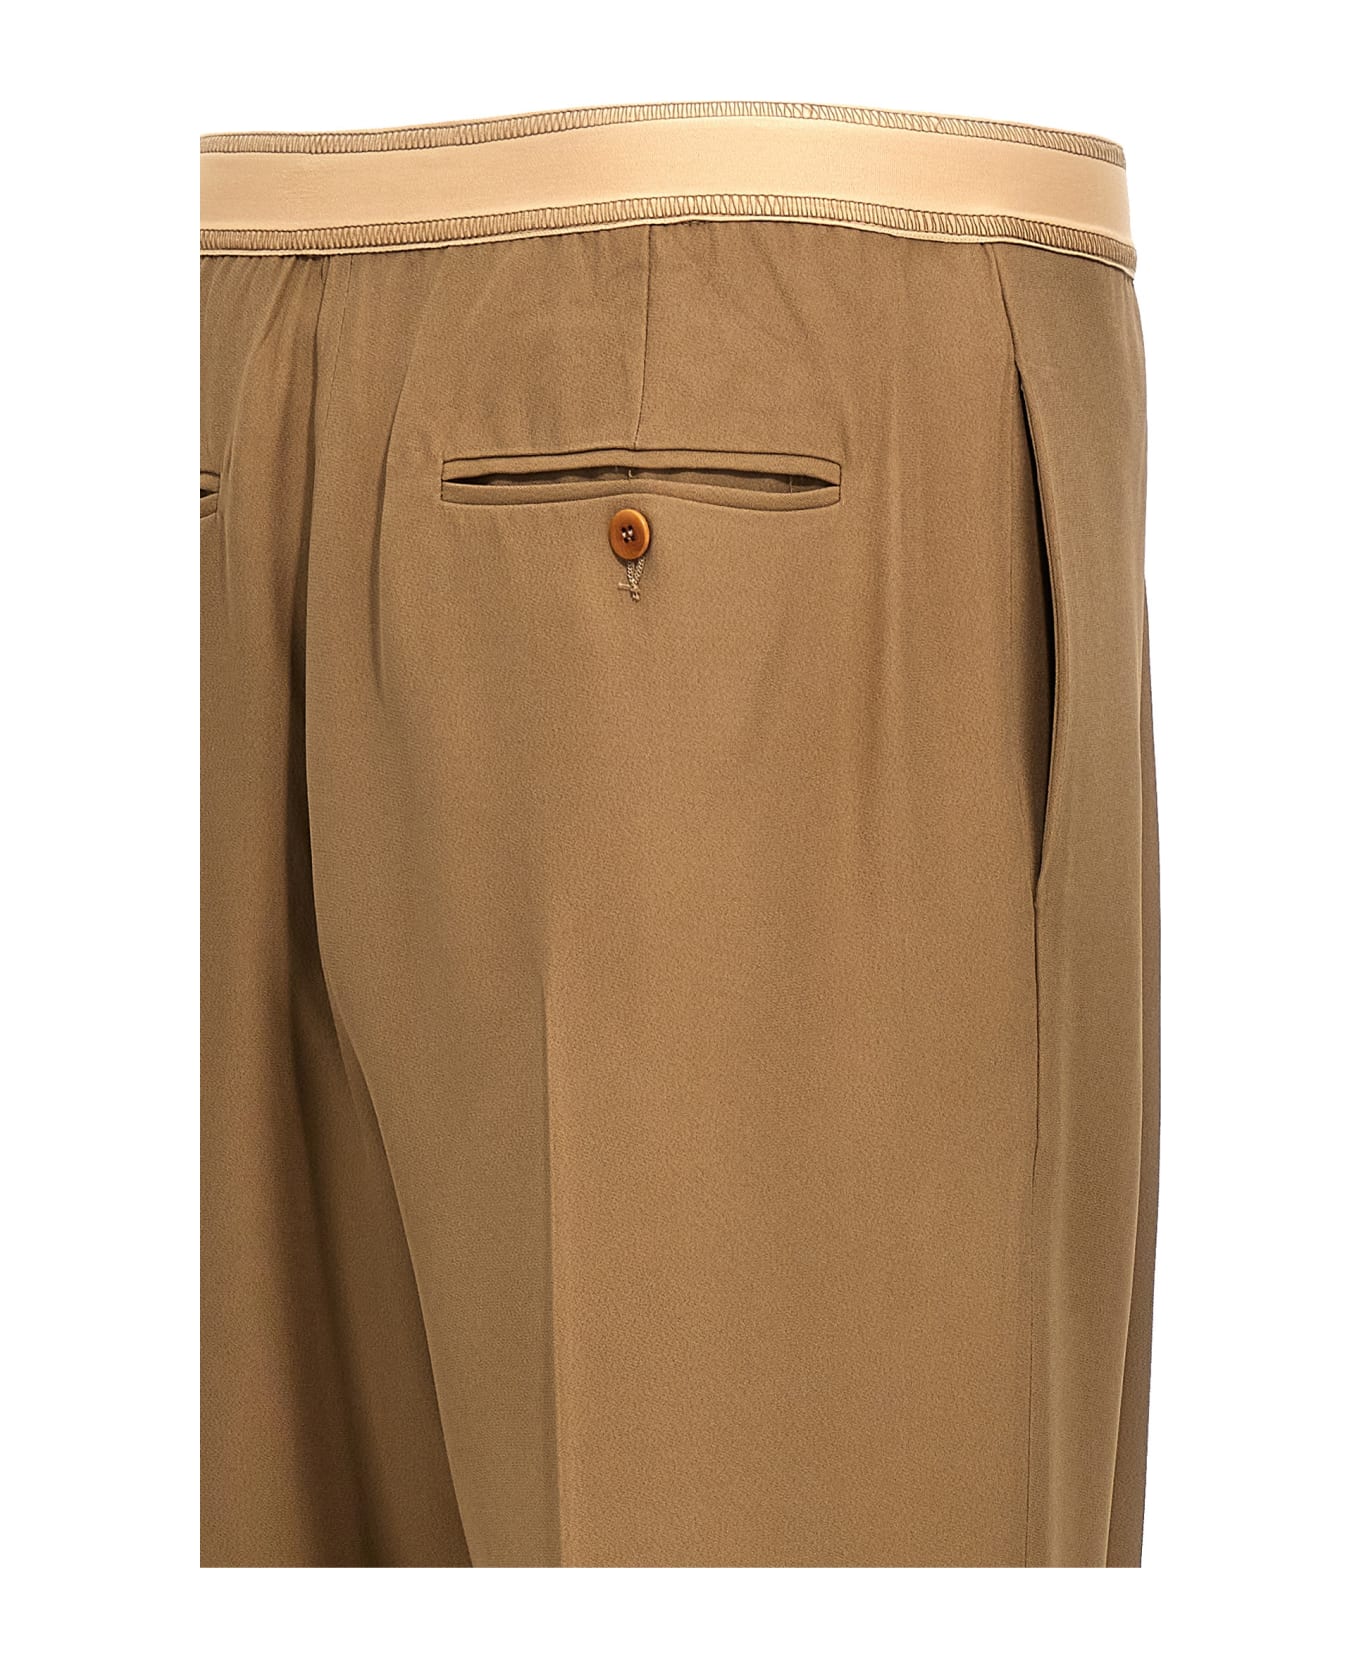 Magliano 'boxer' Pants - Beige ボトムス